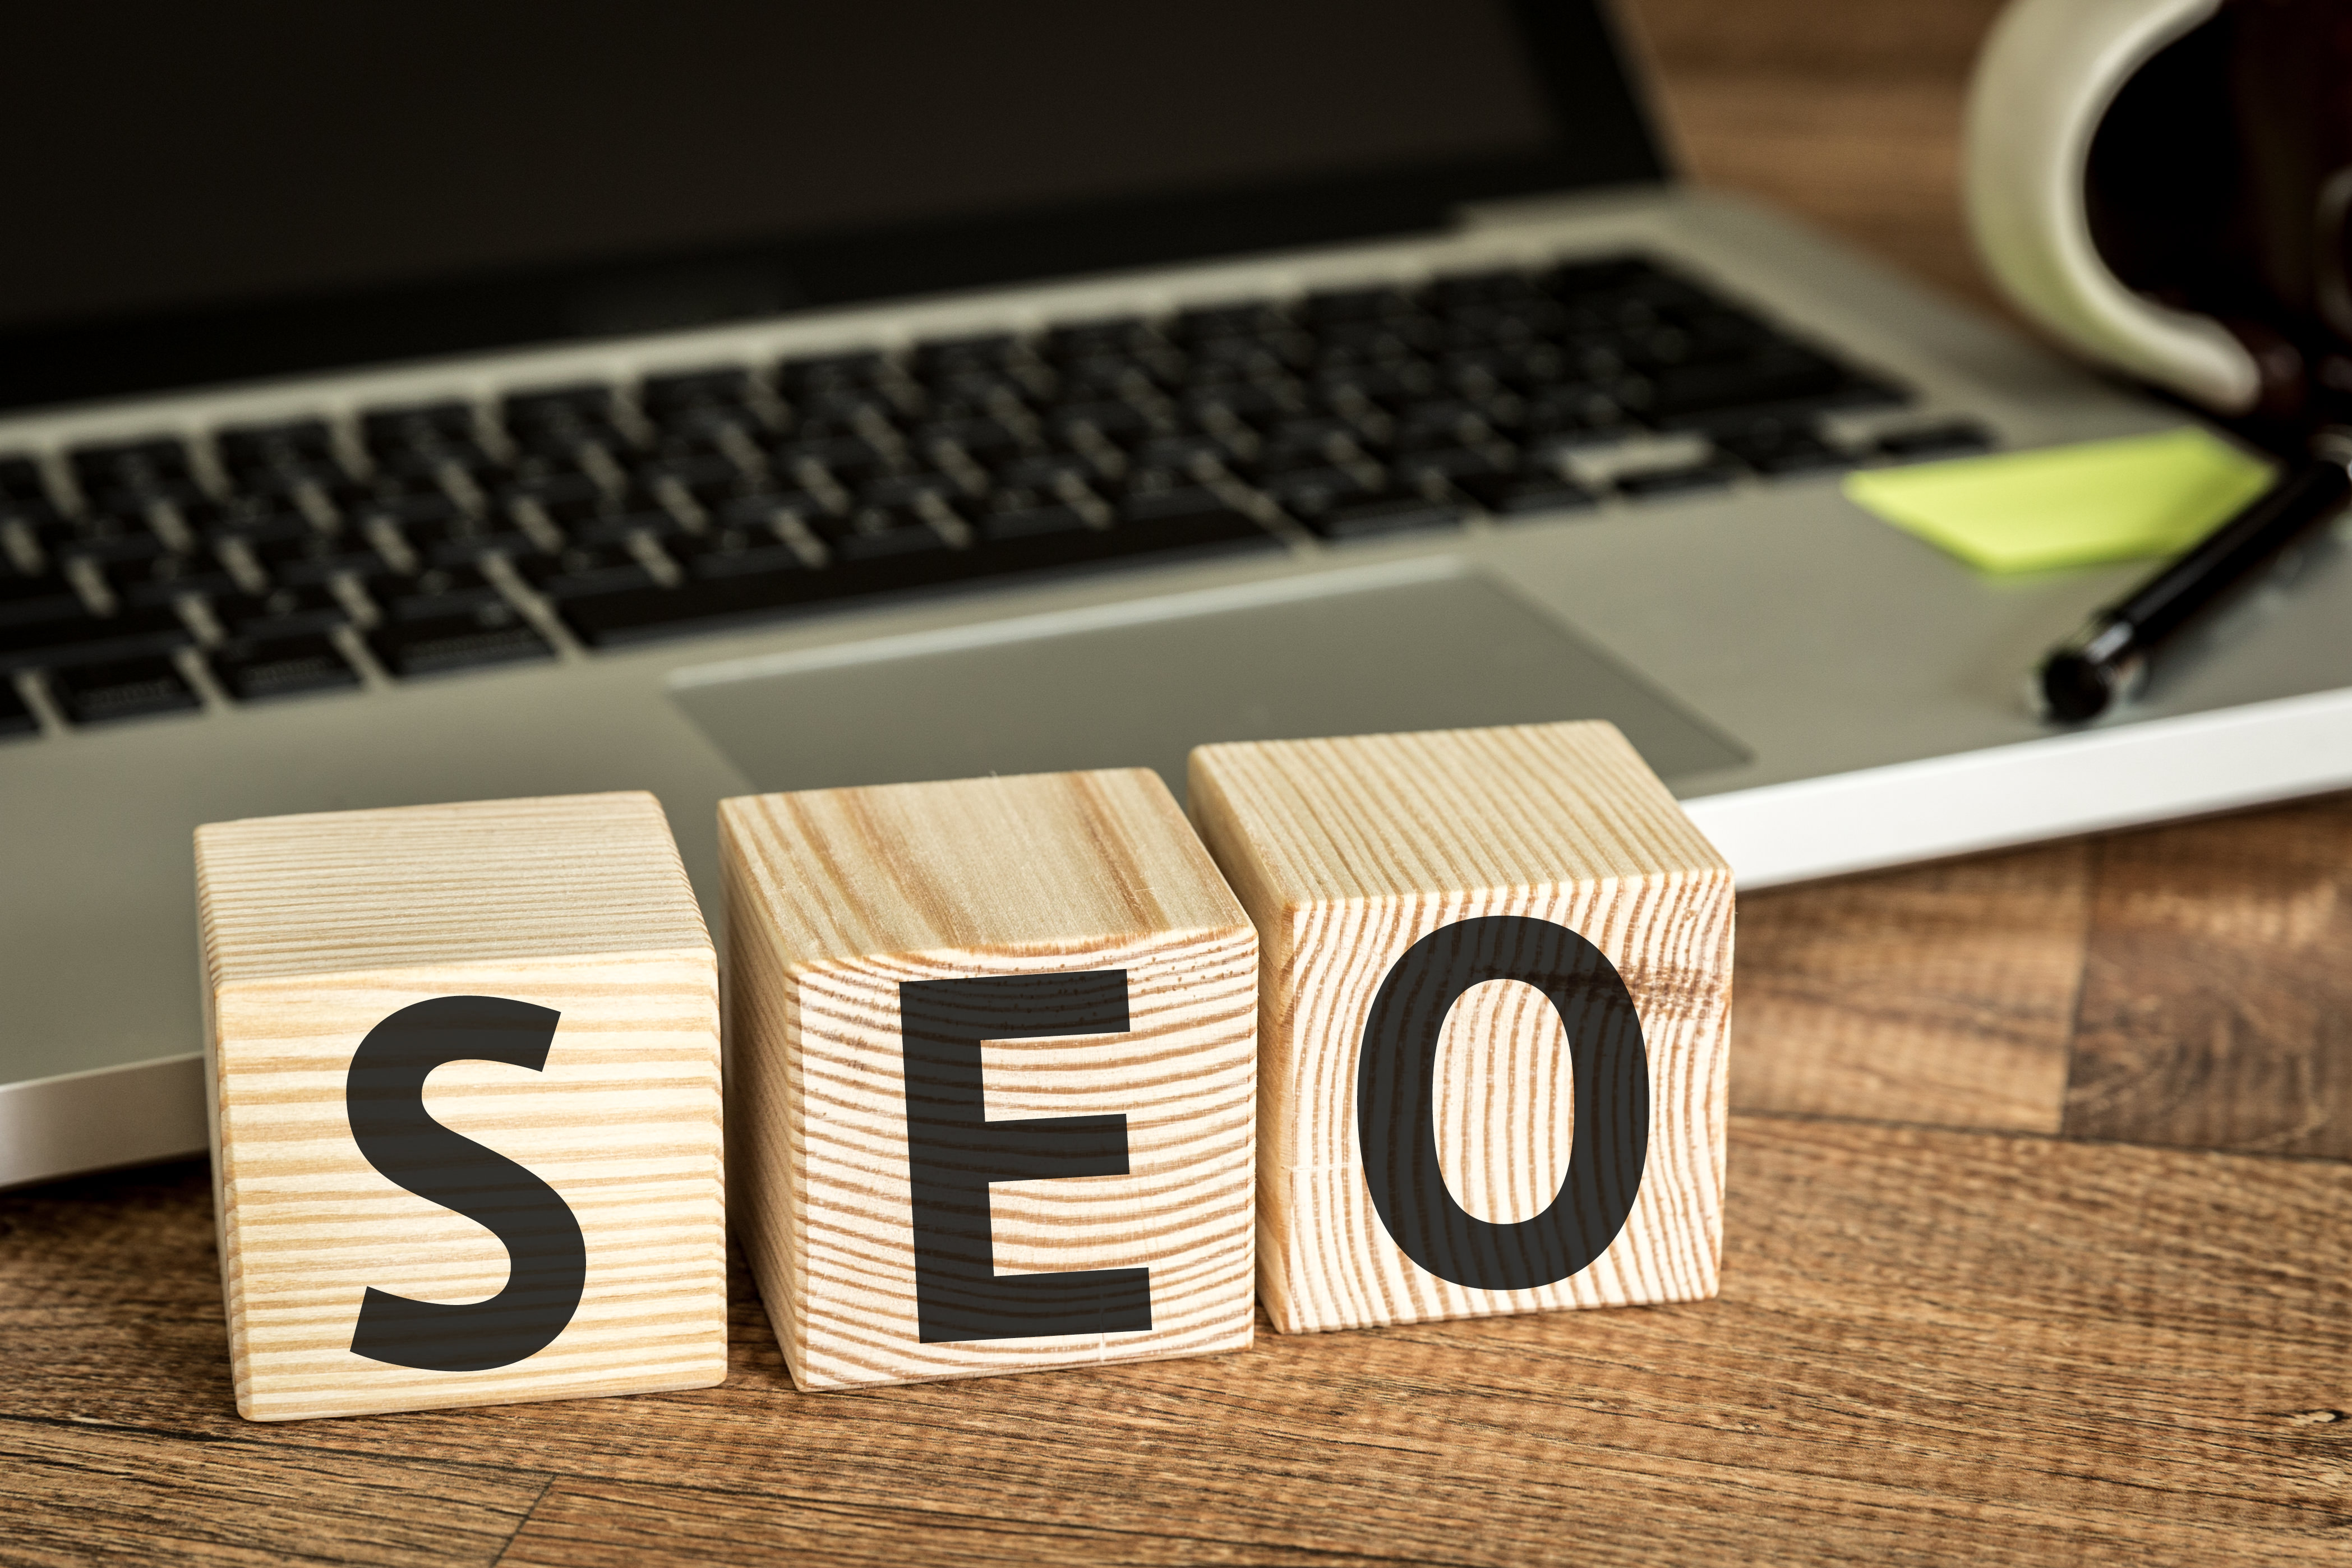 SEO (Search Engine Optimization) written on a wooden cube in front of a laptop